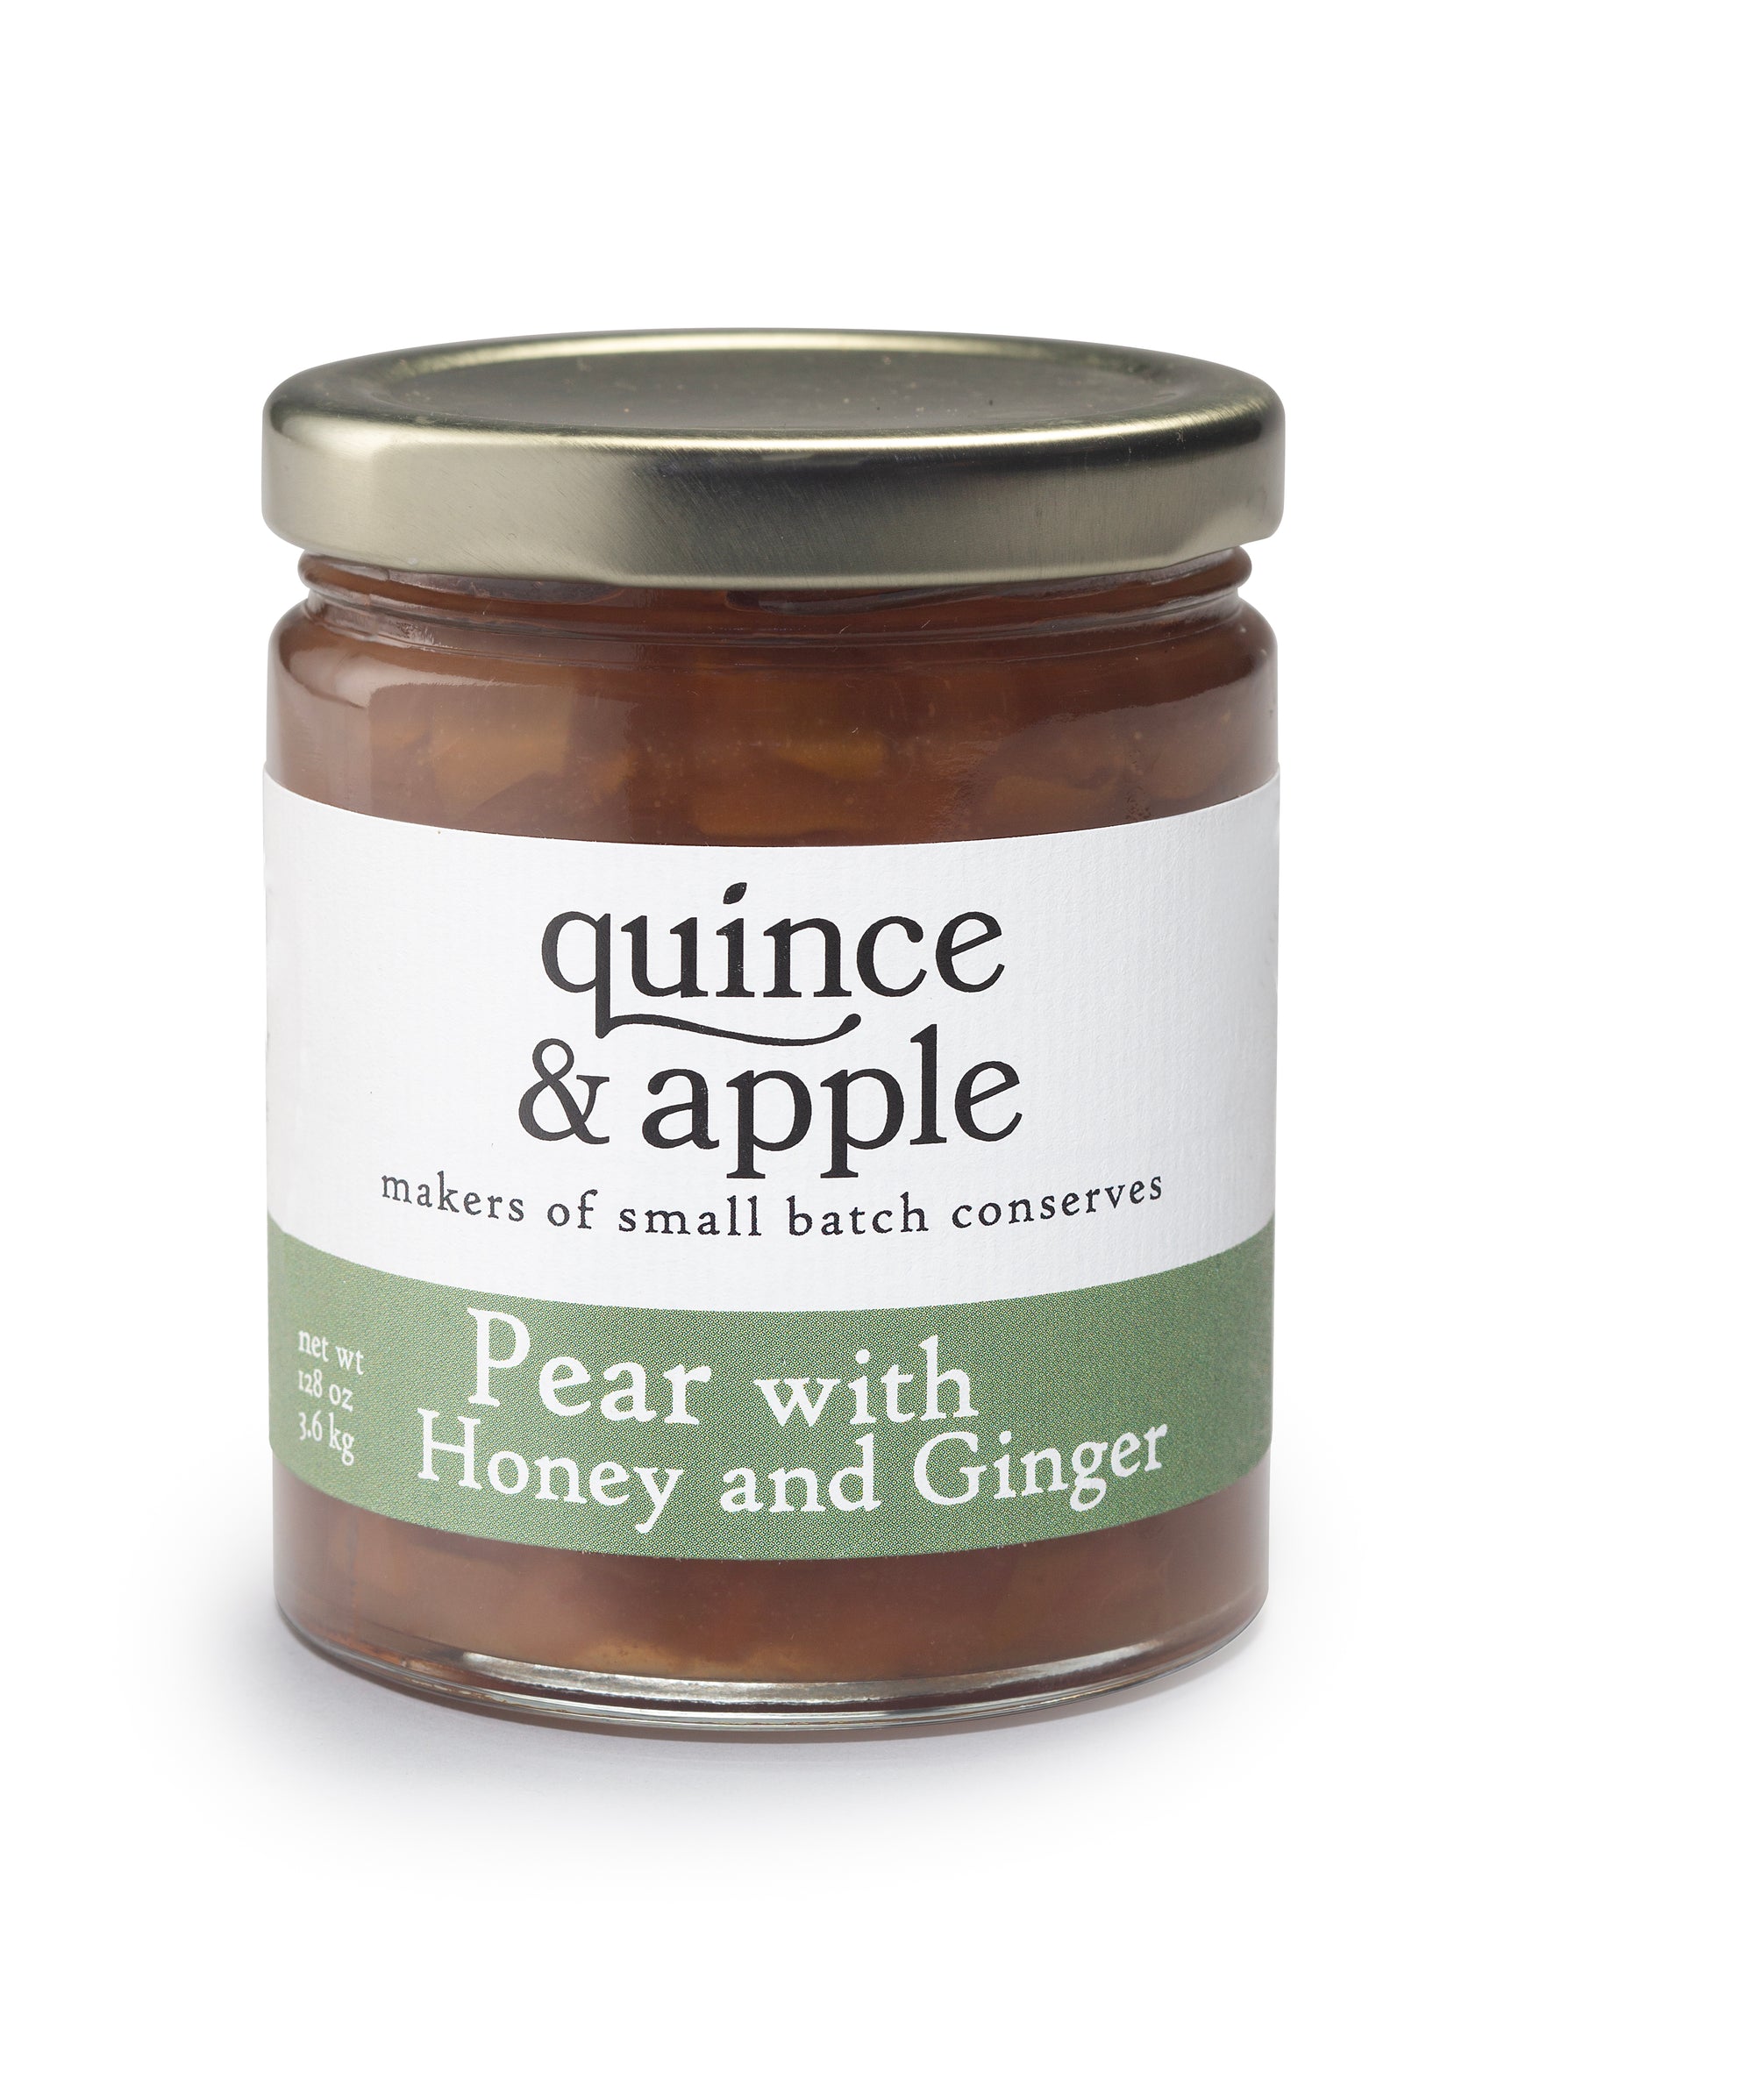 Pear with Honey and Ginger -  Case of 12 - 6 oz Jars